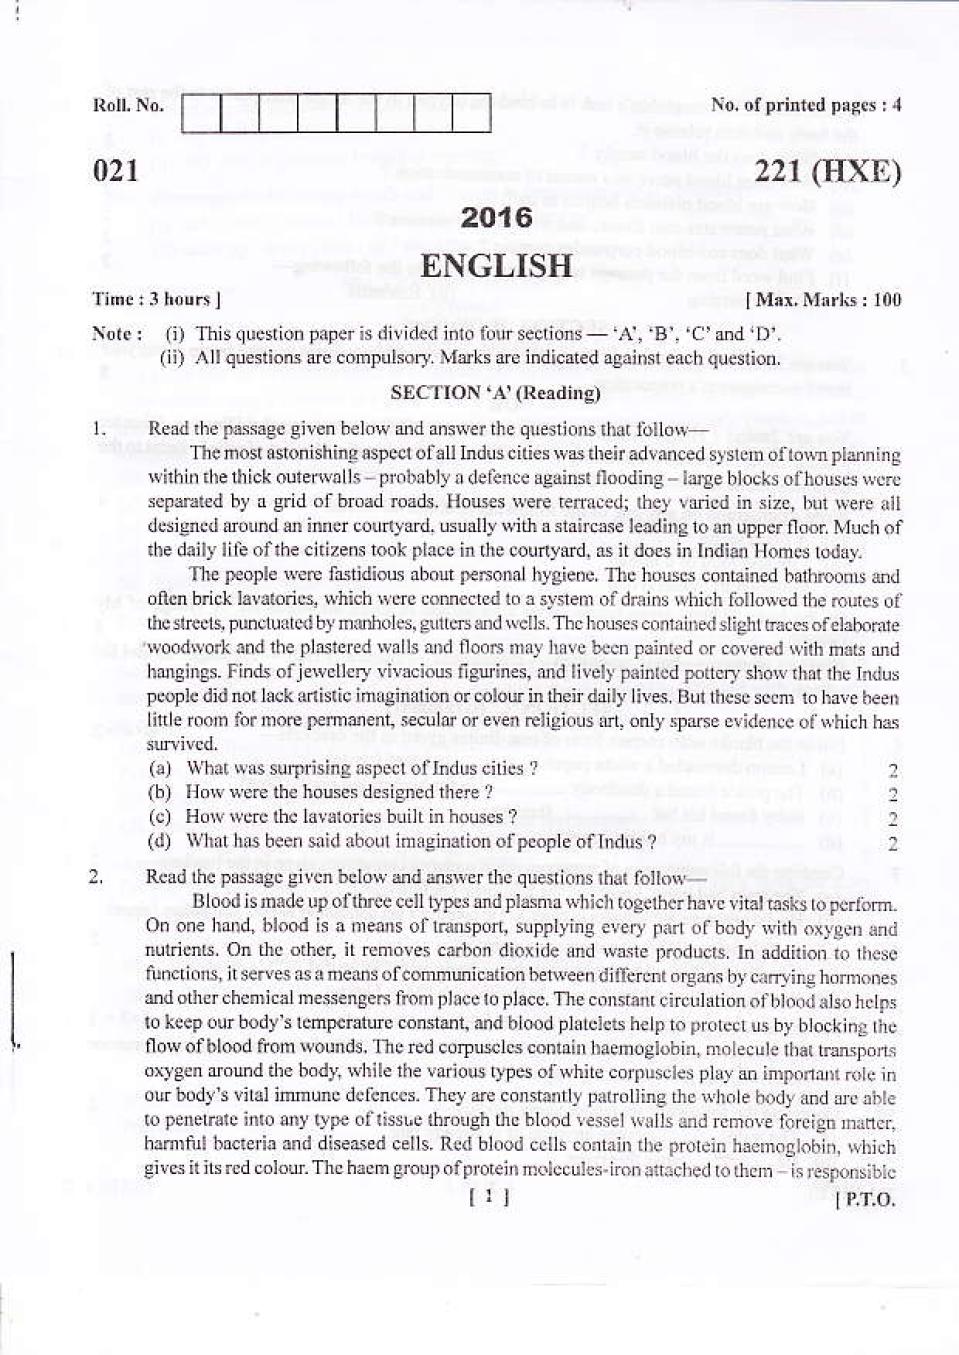 Uttarakhand Board Class 10 Question Paper 2016 for English - Page 1